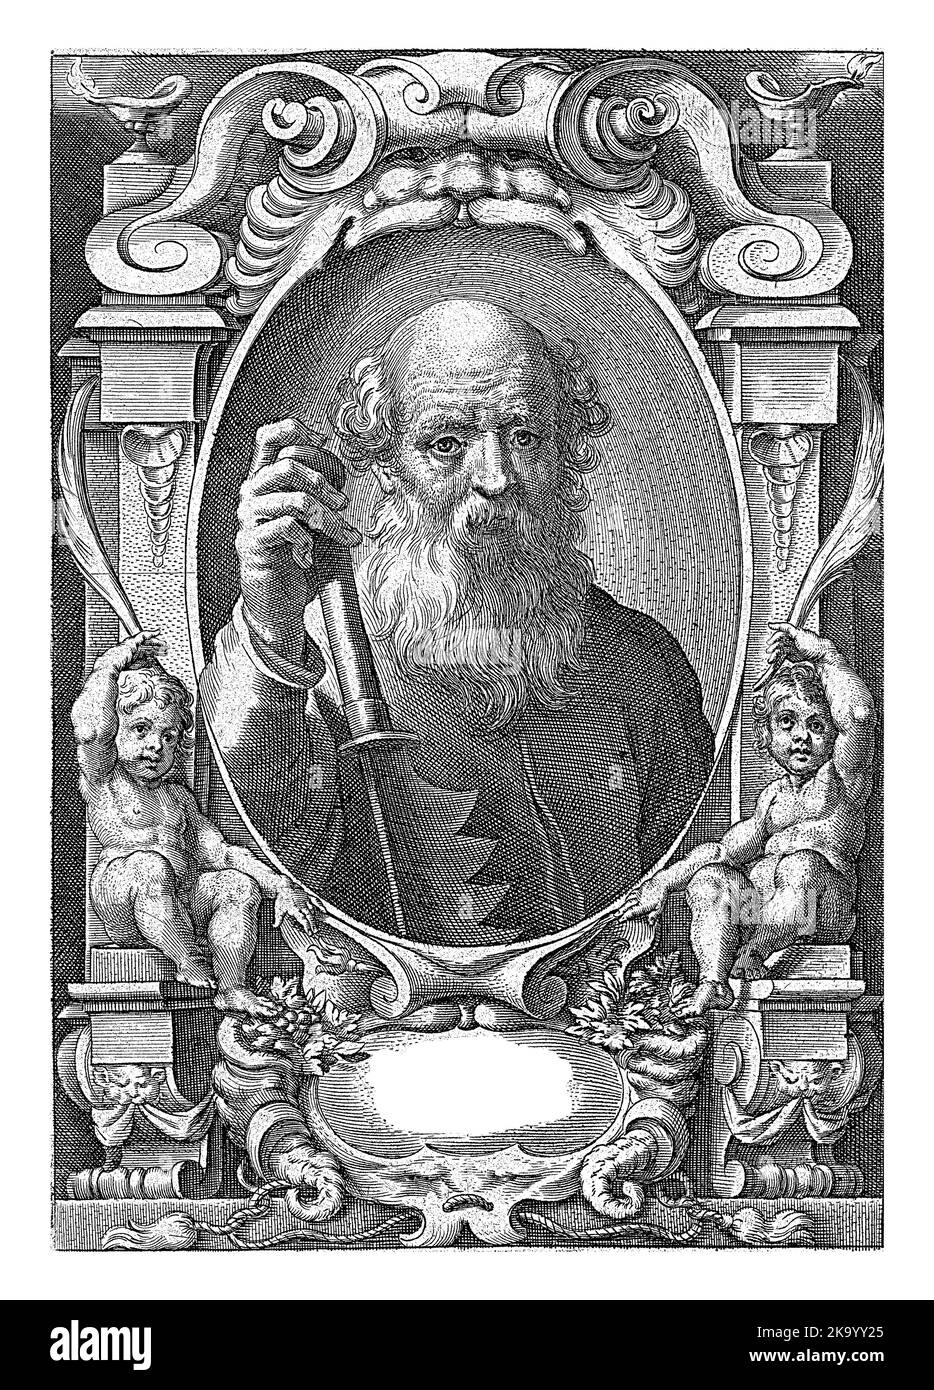 Apostle Simon Zelotes with a saw in a frame with architectural ornaments, Jan-Baptist BarbÃ©, after Theodoor van Loon, 1588 - 1648 Stock Photo